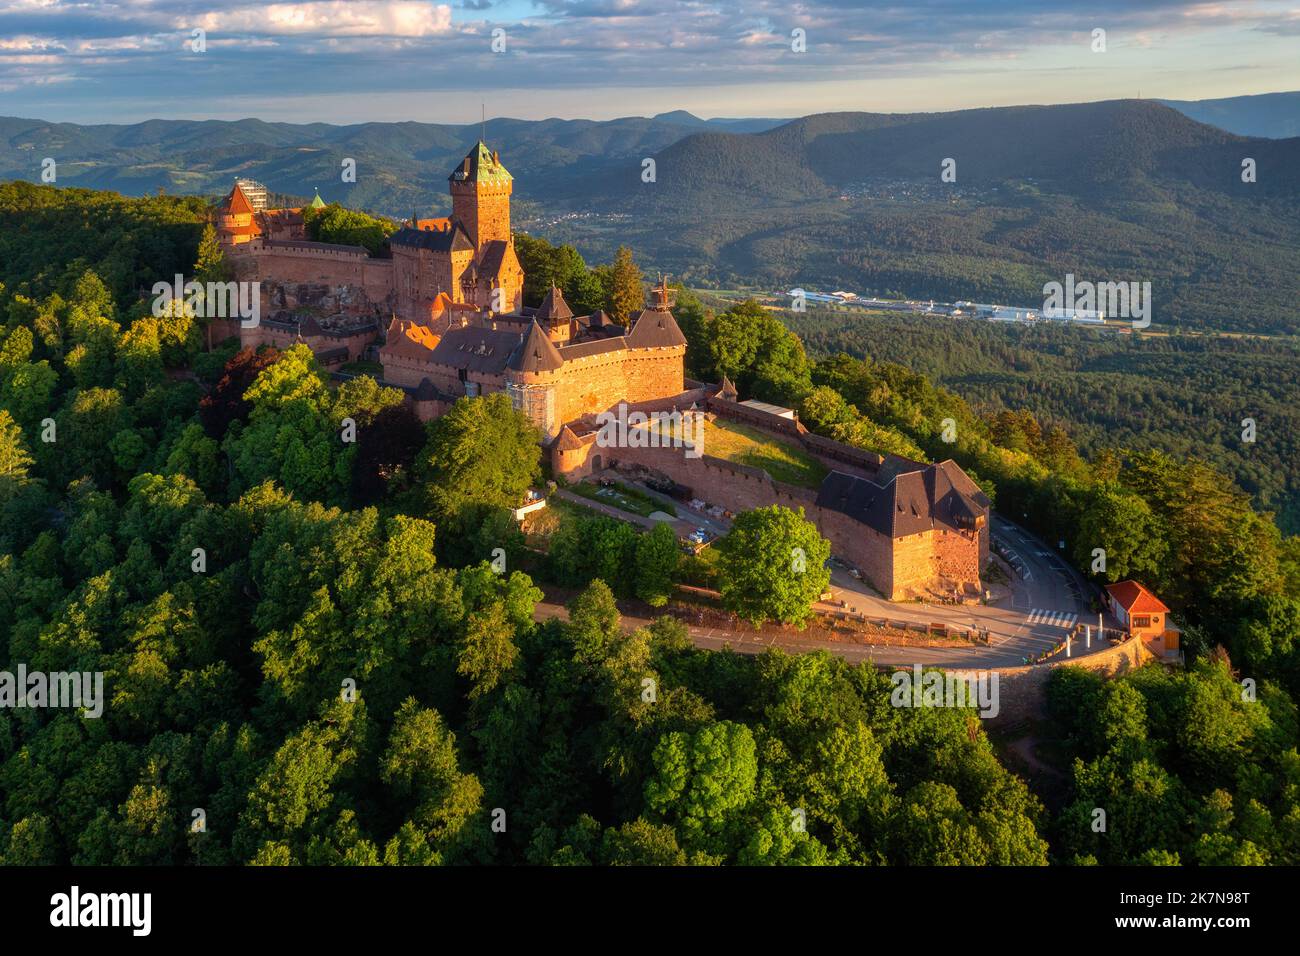 Medieval Chateau du Haut-Koenigsbourg castle in Vosges mountains by Selestat is one of the main historical landmarks in Alsace, France Stock Photo